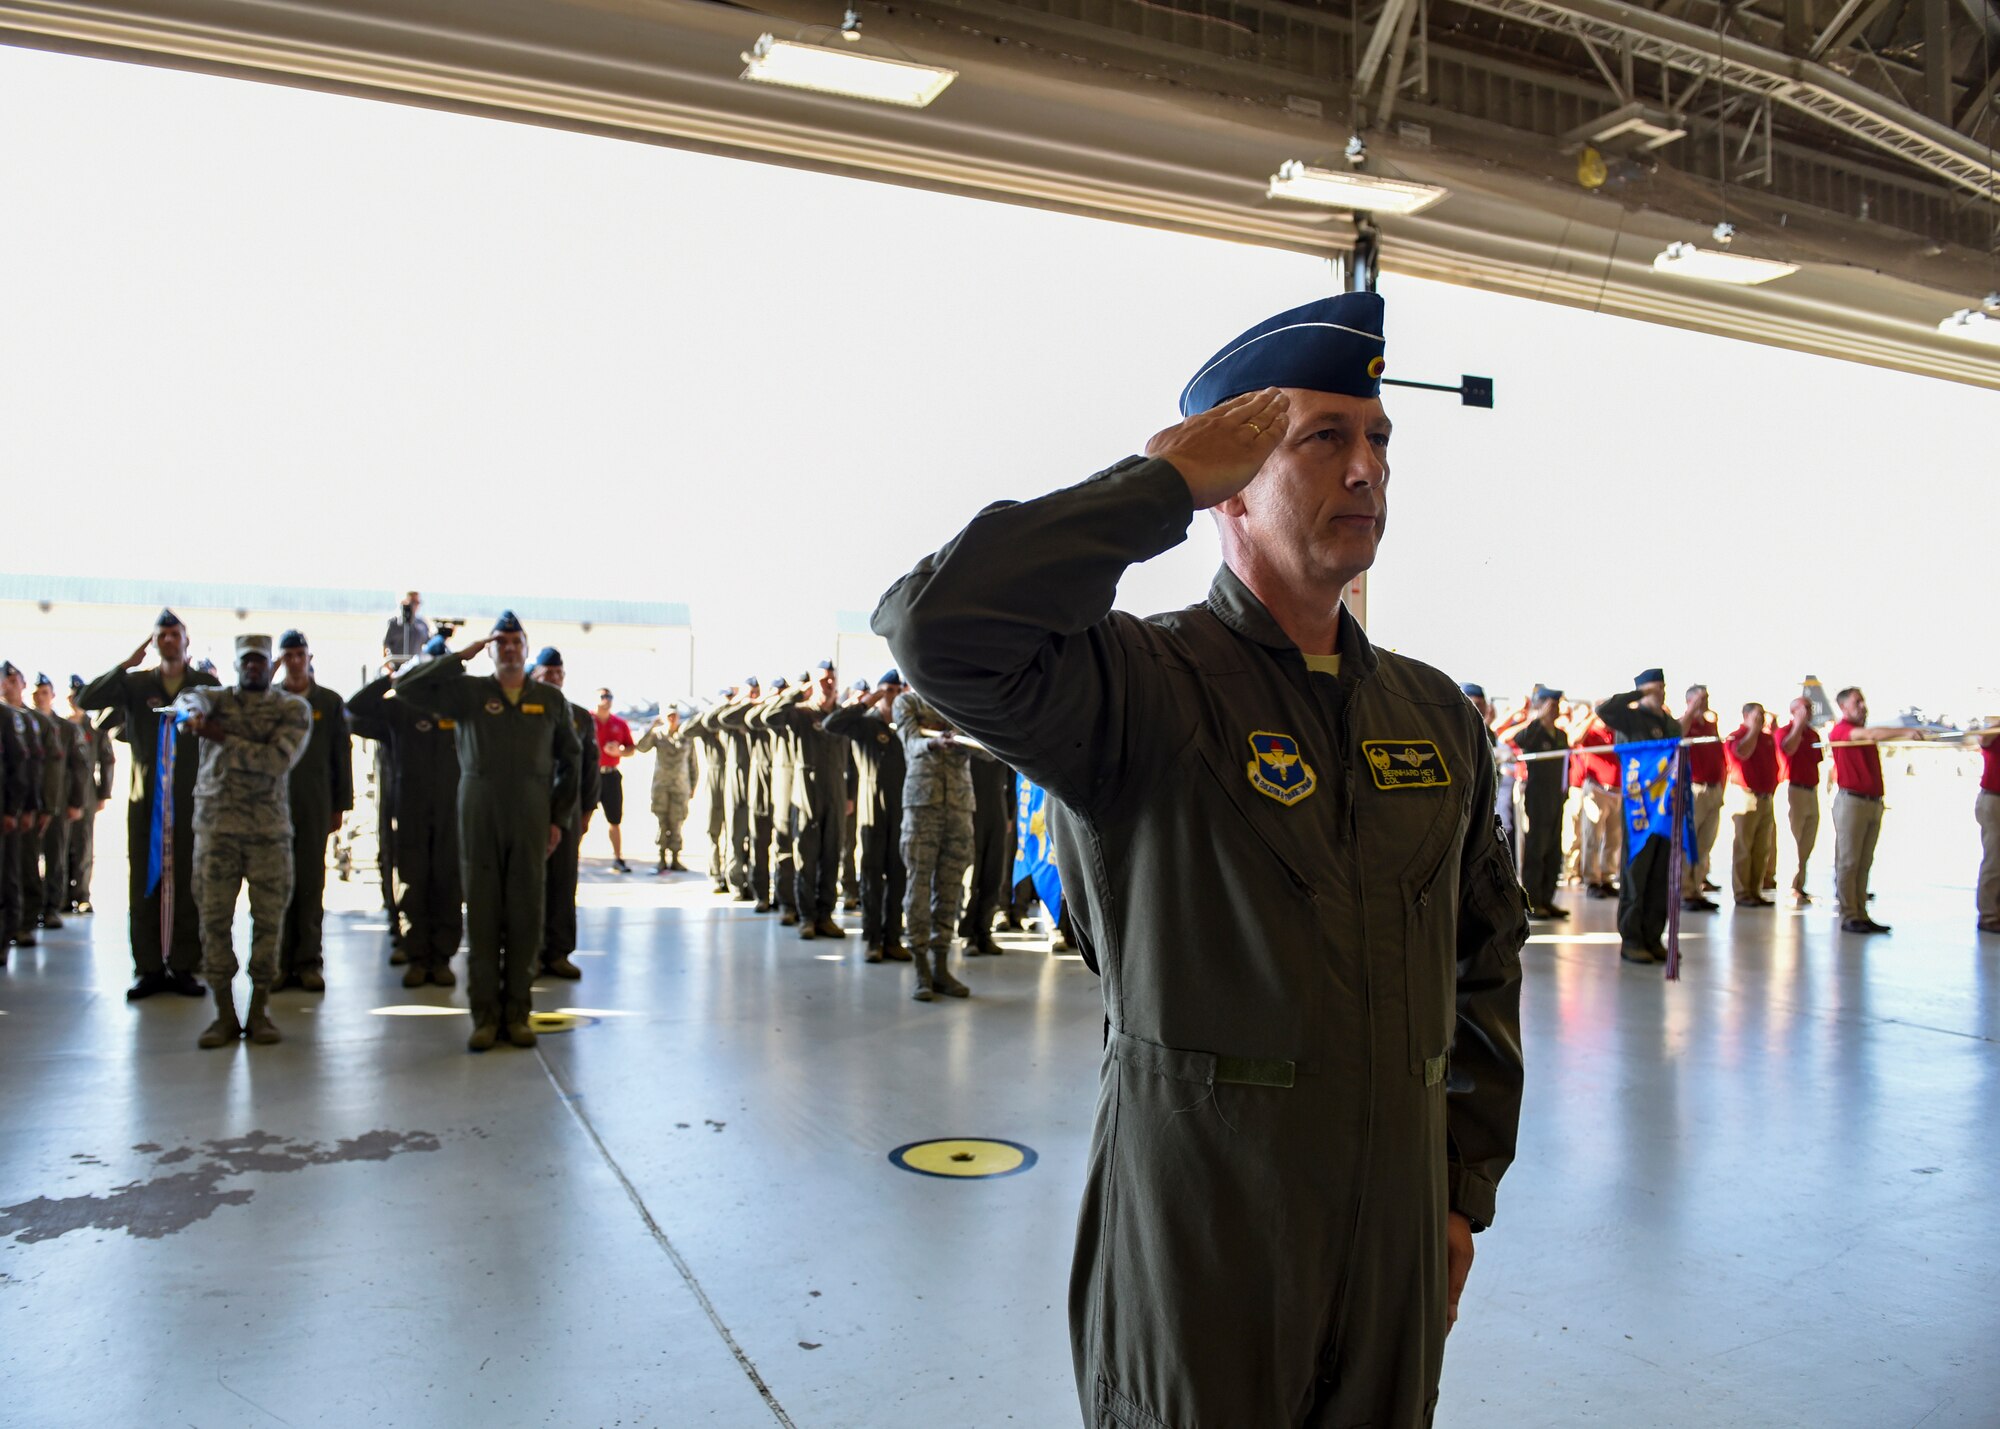 A pilot salutes in front of a squadron of pilots also saluting.